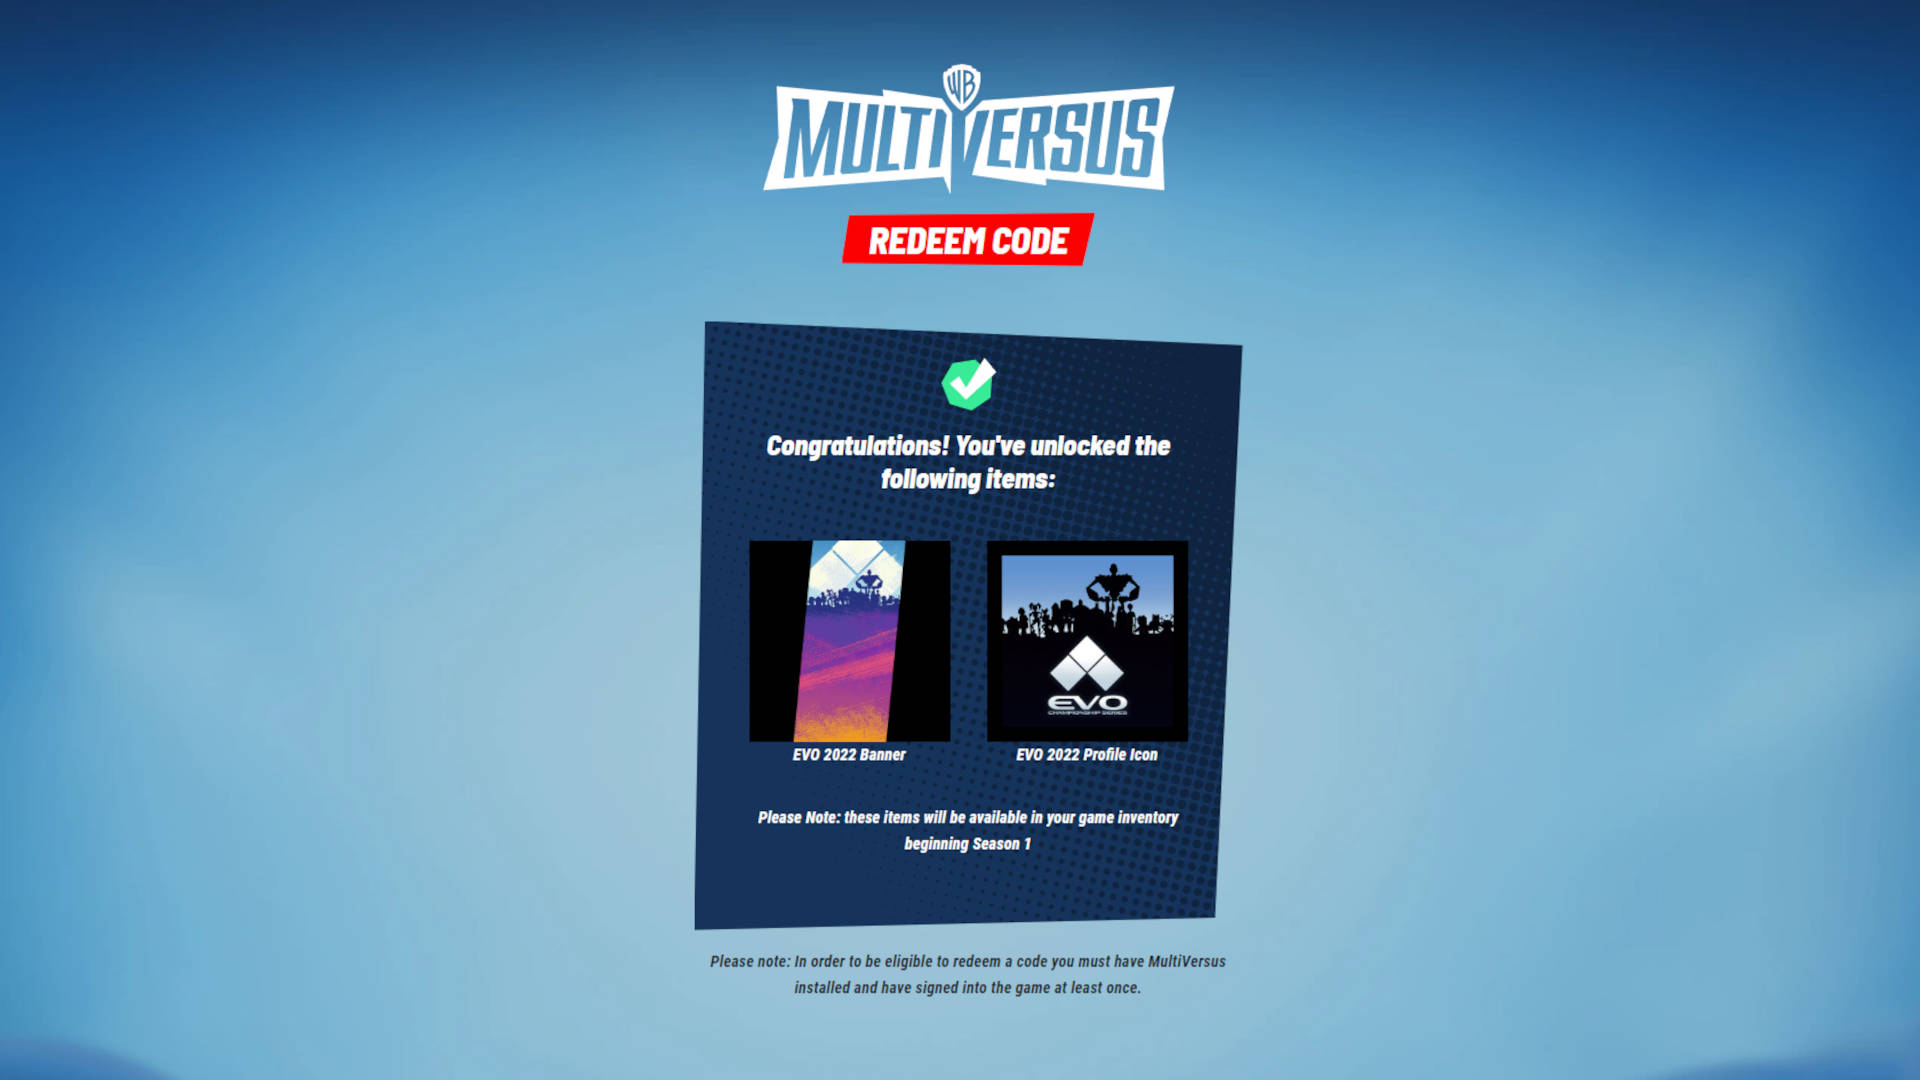 Multiversus codes redeem: the confirmation message from the Multiversus codes site that says the items are successfully unlocked.